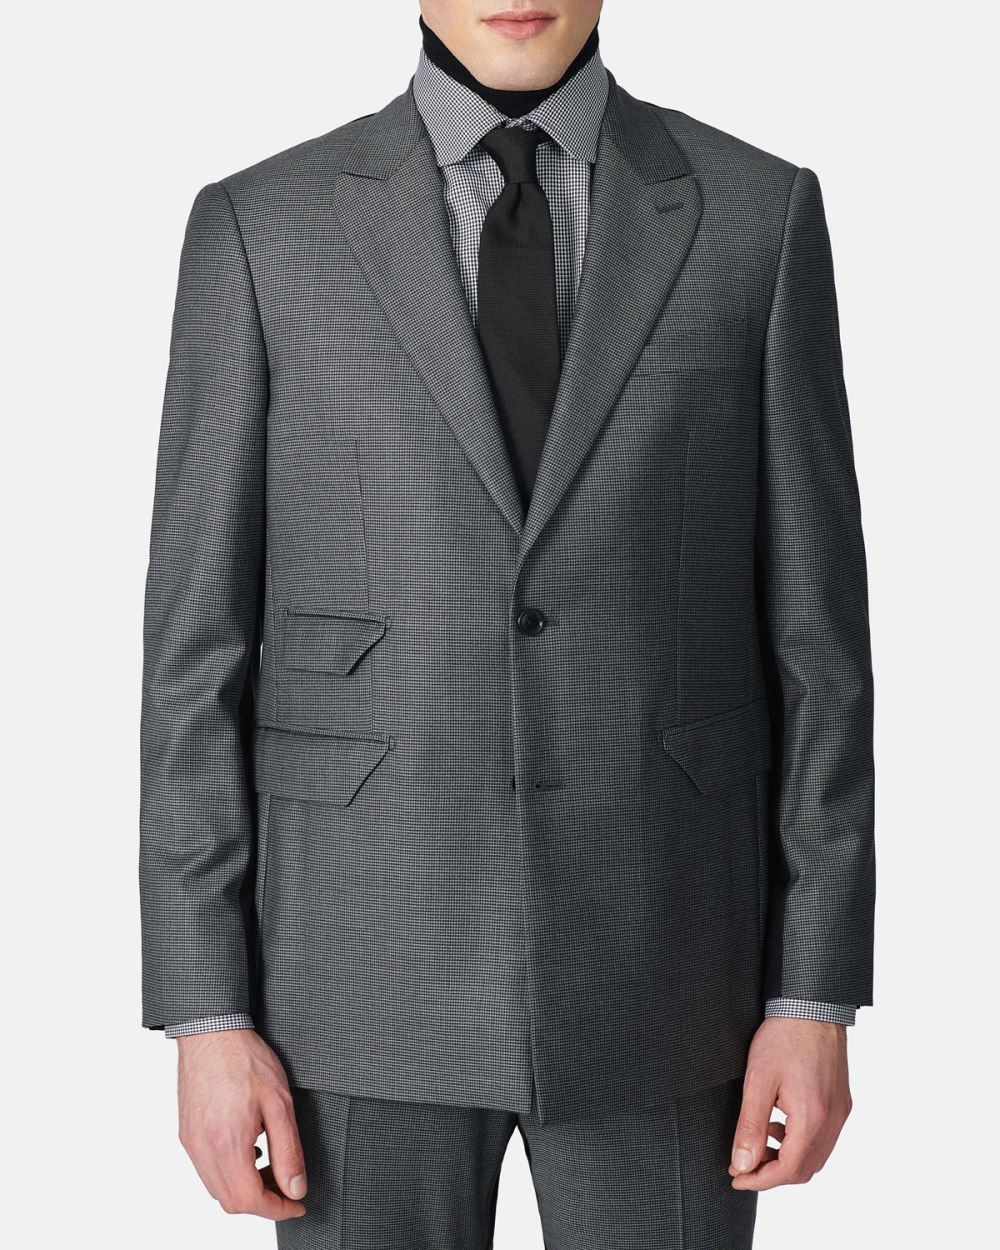 Bicolor Single Breasted Suit